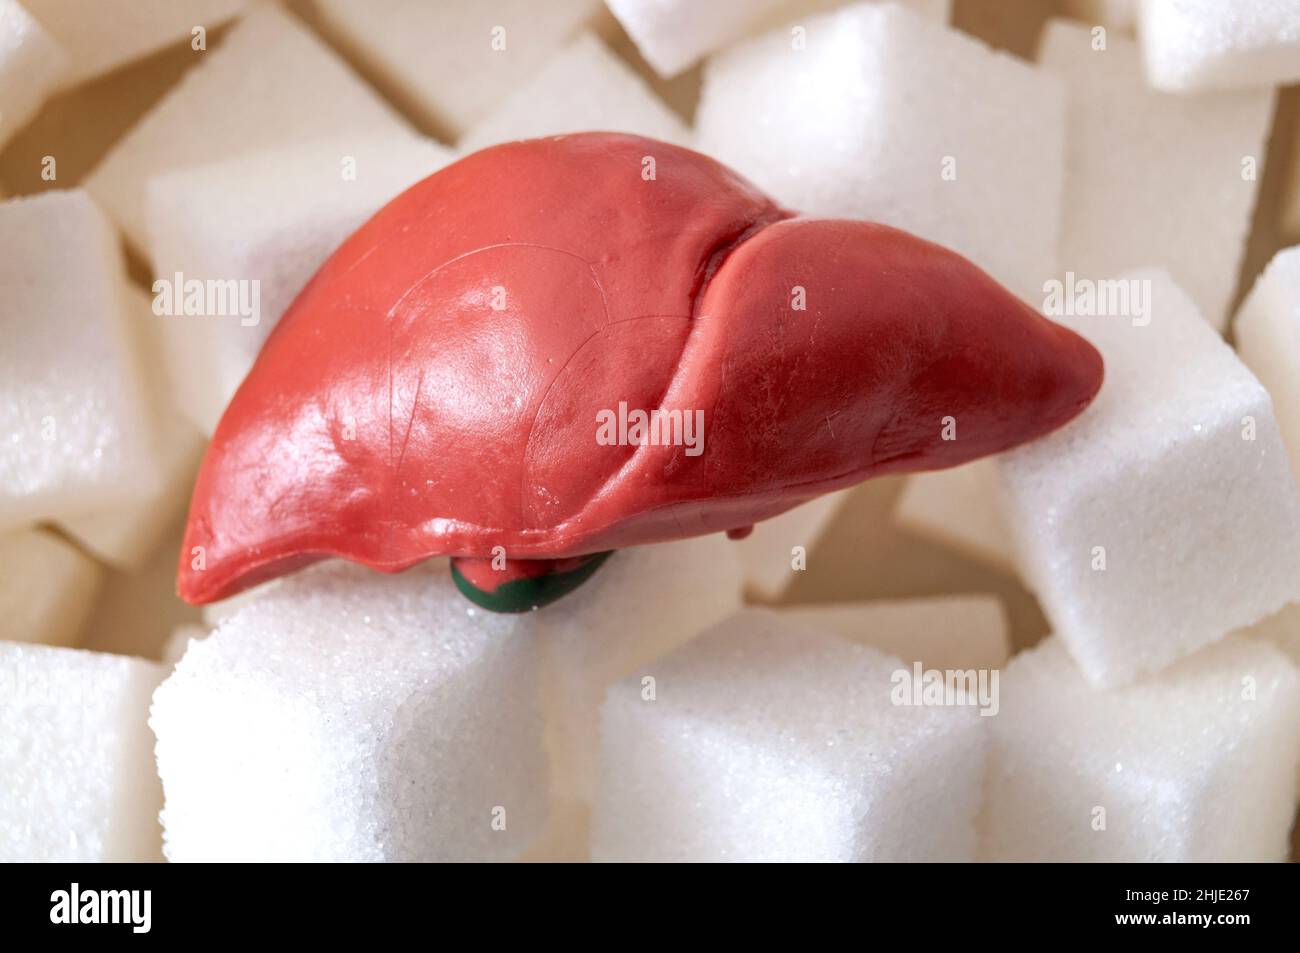 Bad died and nonalcoholic fatty liver disease concept with a liver and sugar cubes, nafld is caused by high levels of fructose accumulated in the live Stock Photo